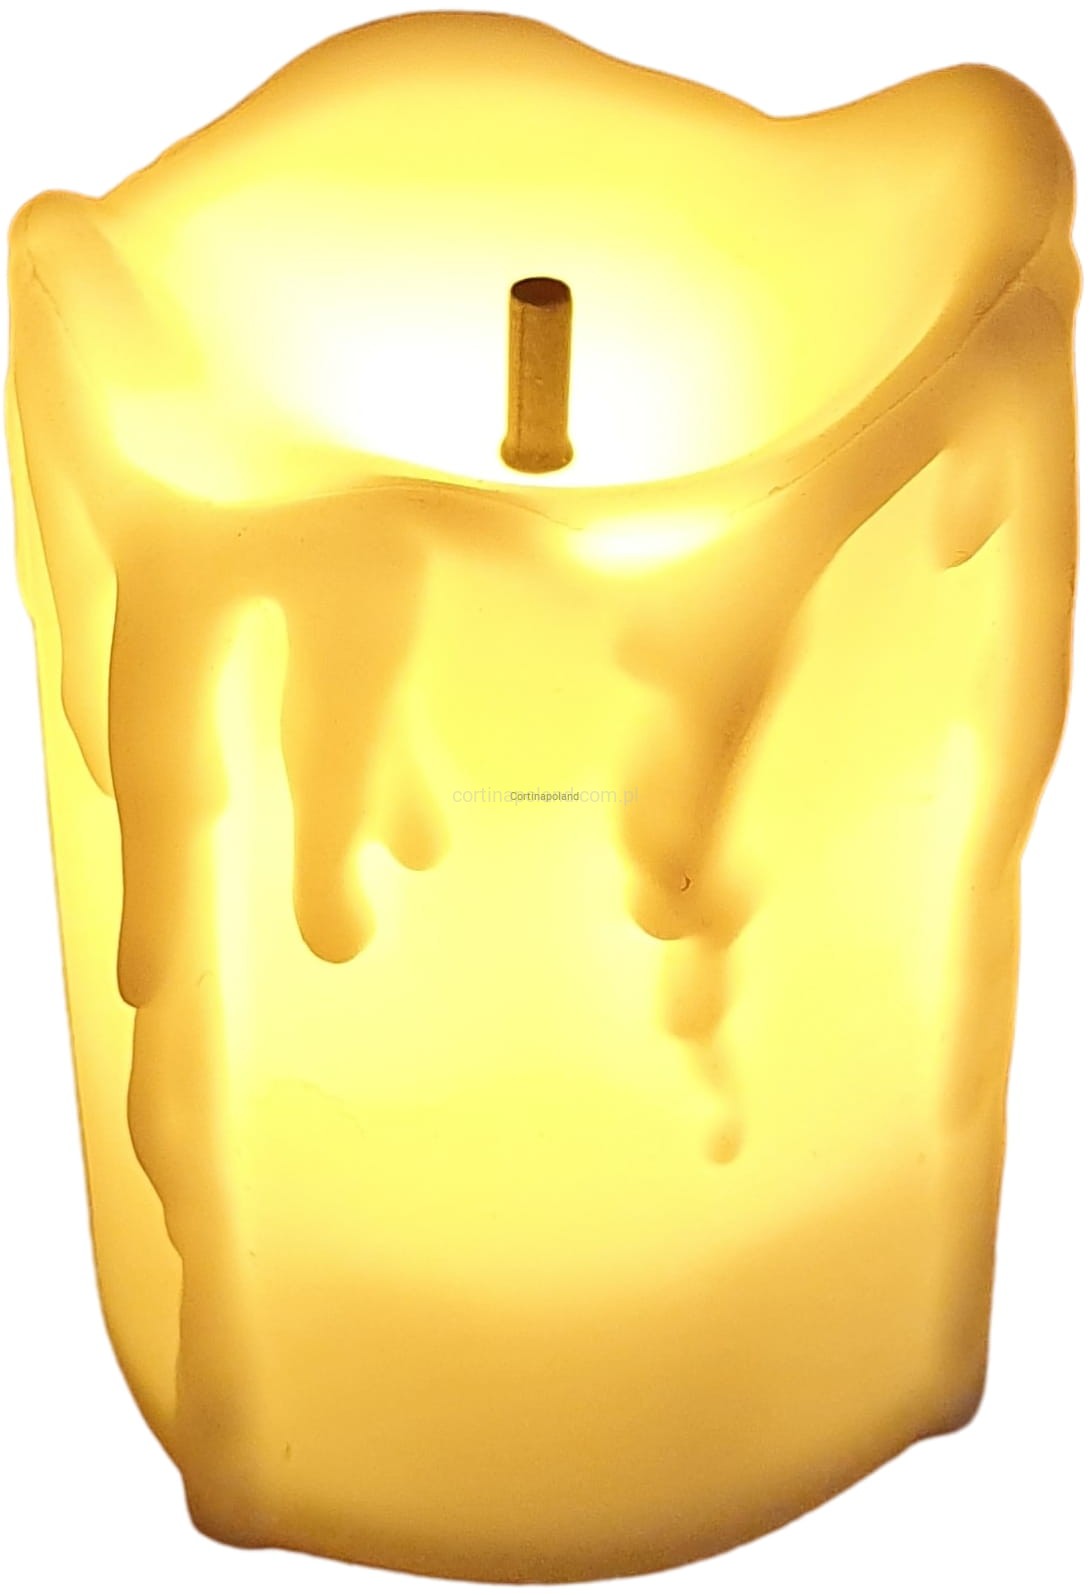 LED Candle (Cross)  - Warm white color - batteries included